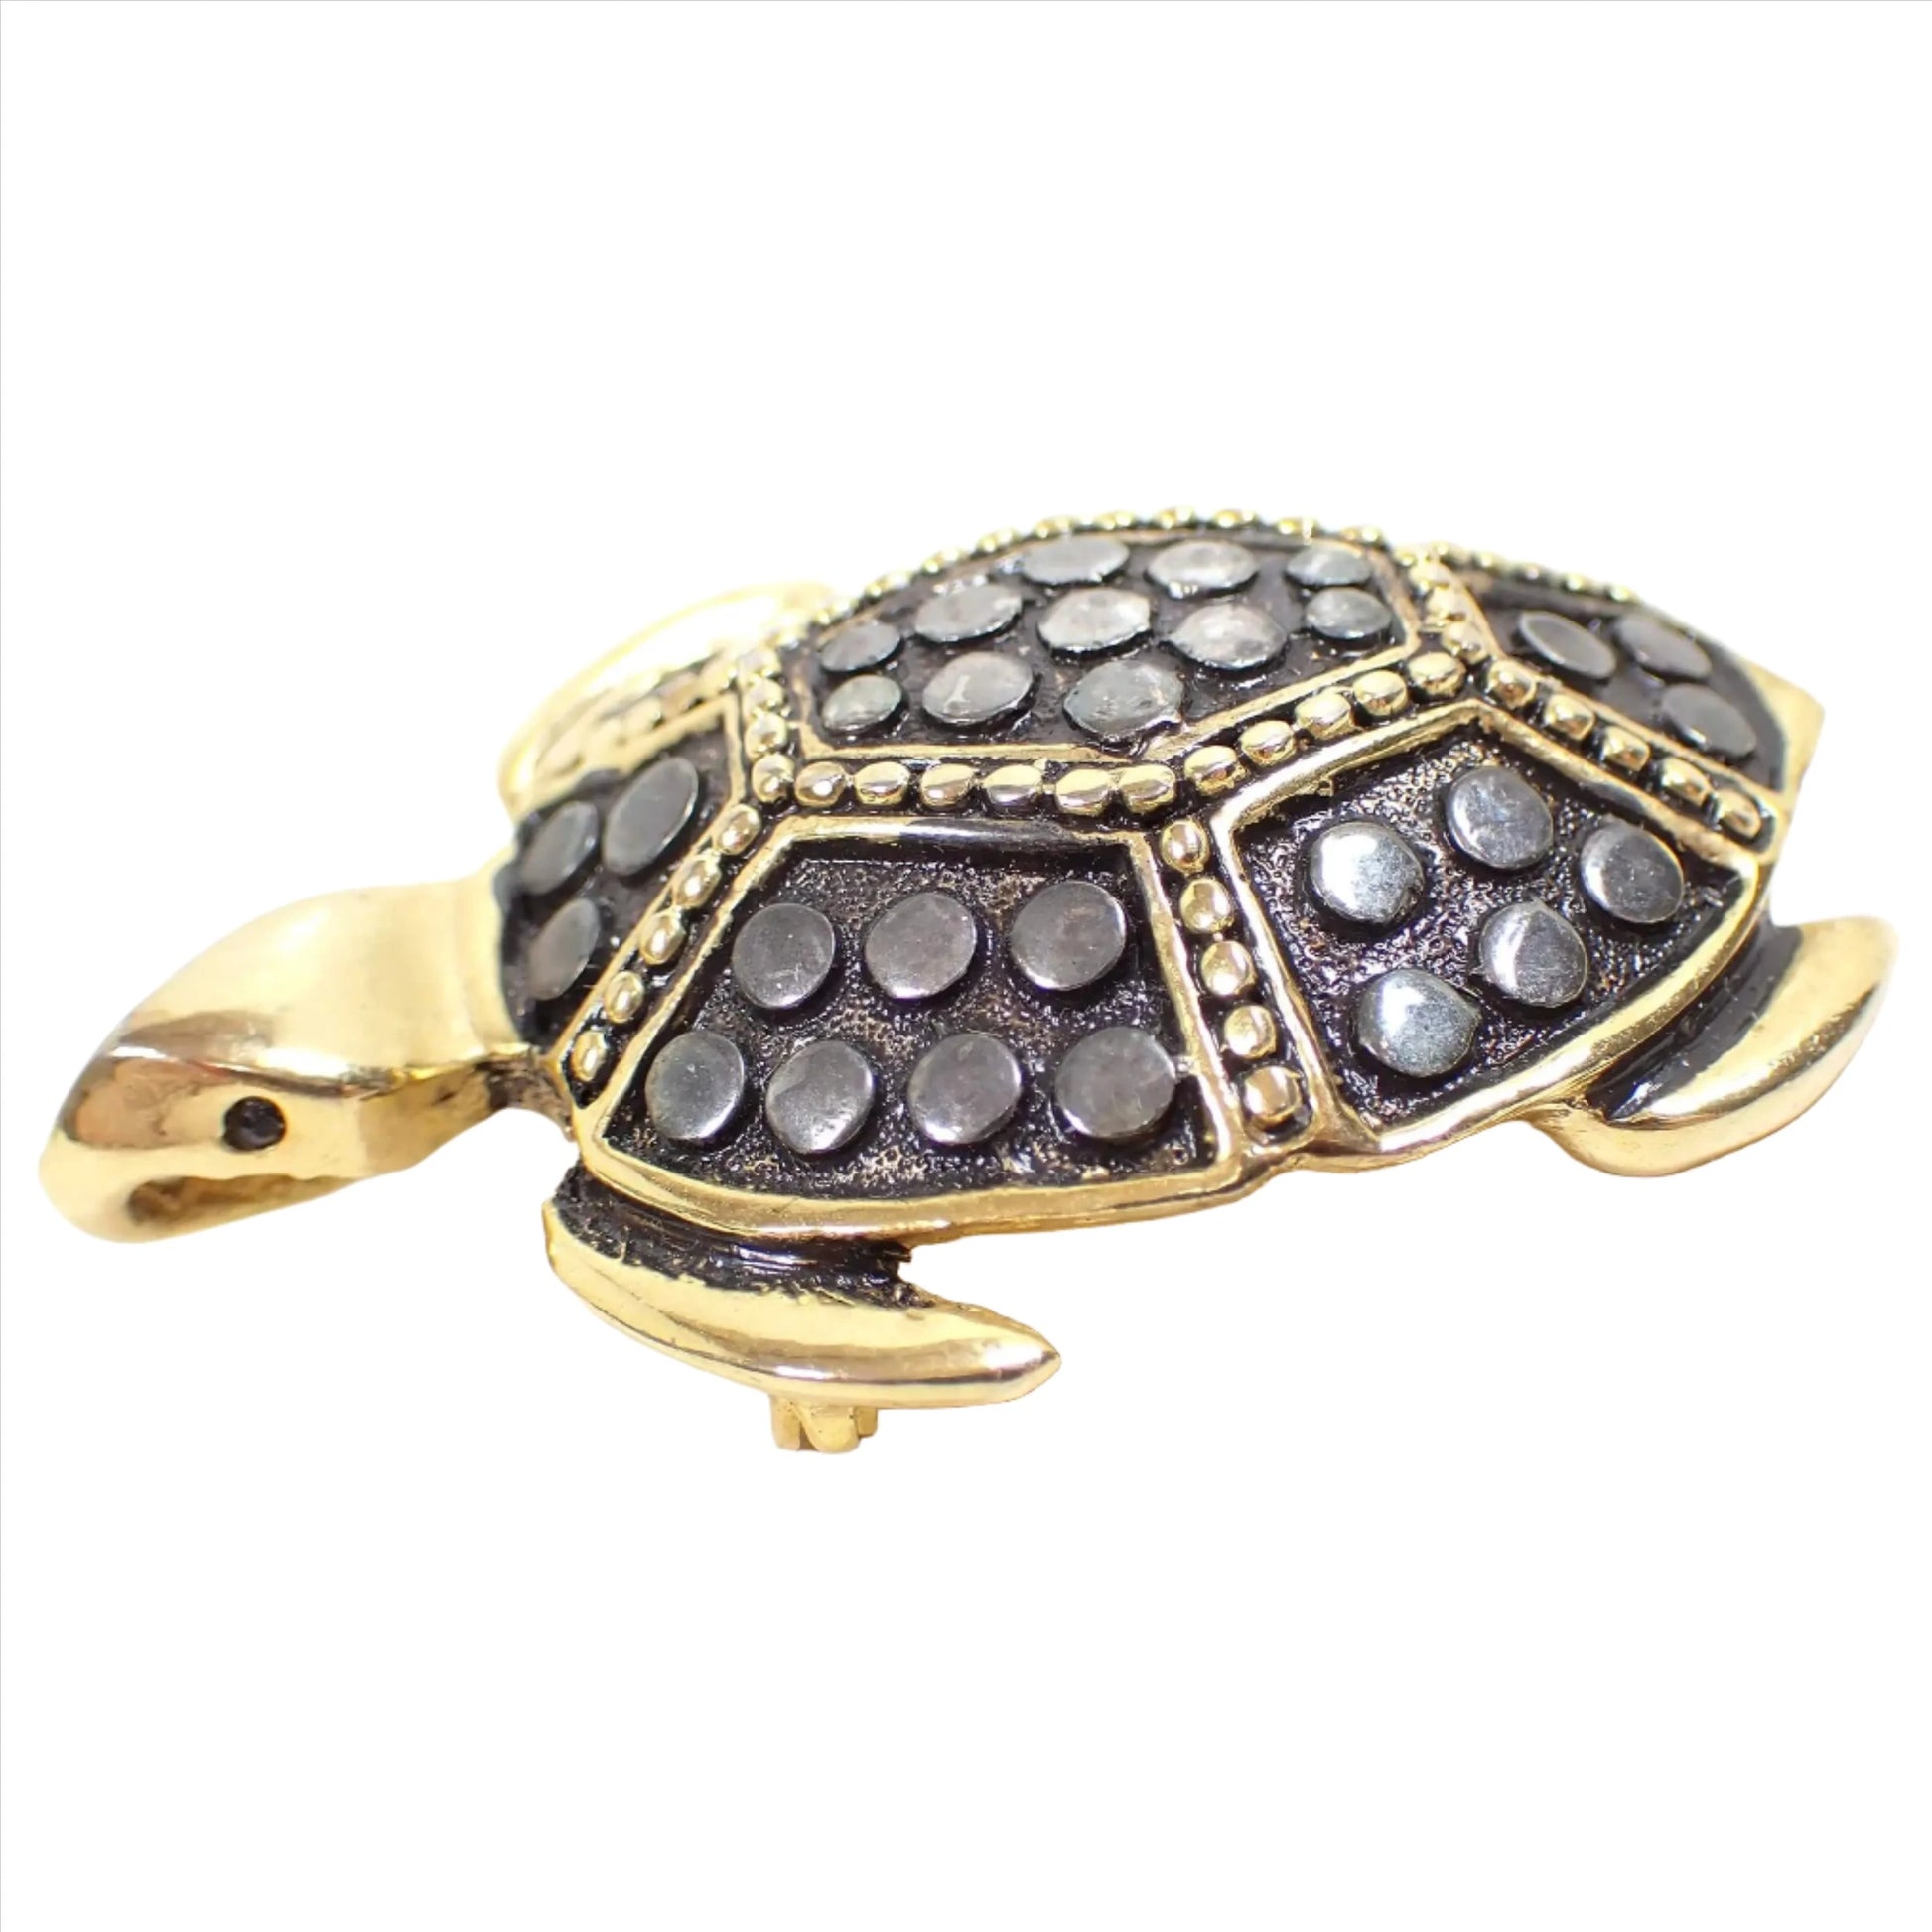 Angled side view of the retro vintage SY pendant brooch pin. The brooch is shaped like a turtle that is gold tone in color with gunmetal color areas on the shell. There are dark gray faceted eyes and the part under the mouth is where the pendant bail is built in if you want to put it on one of your chains to wear as a pendant.